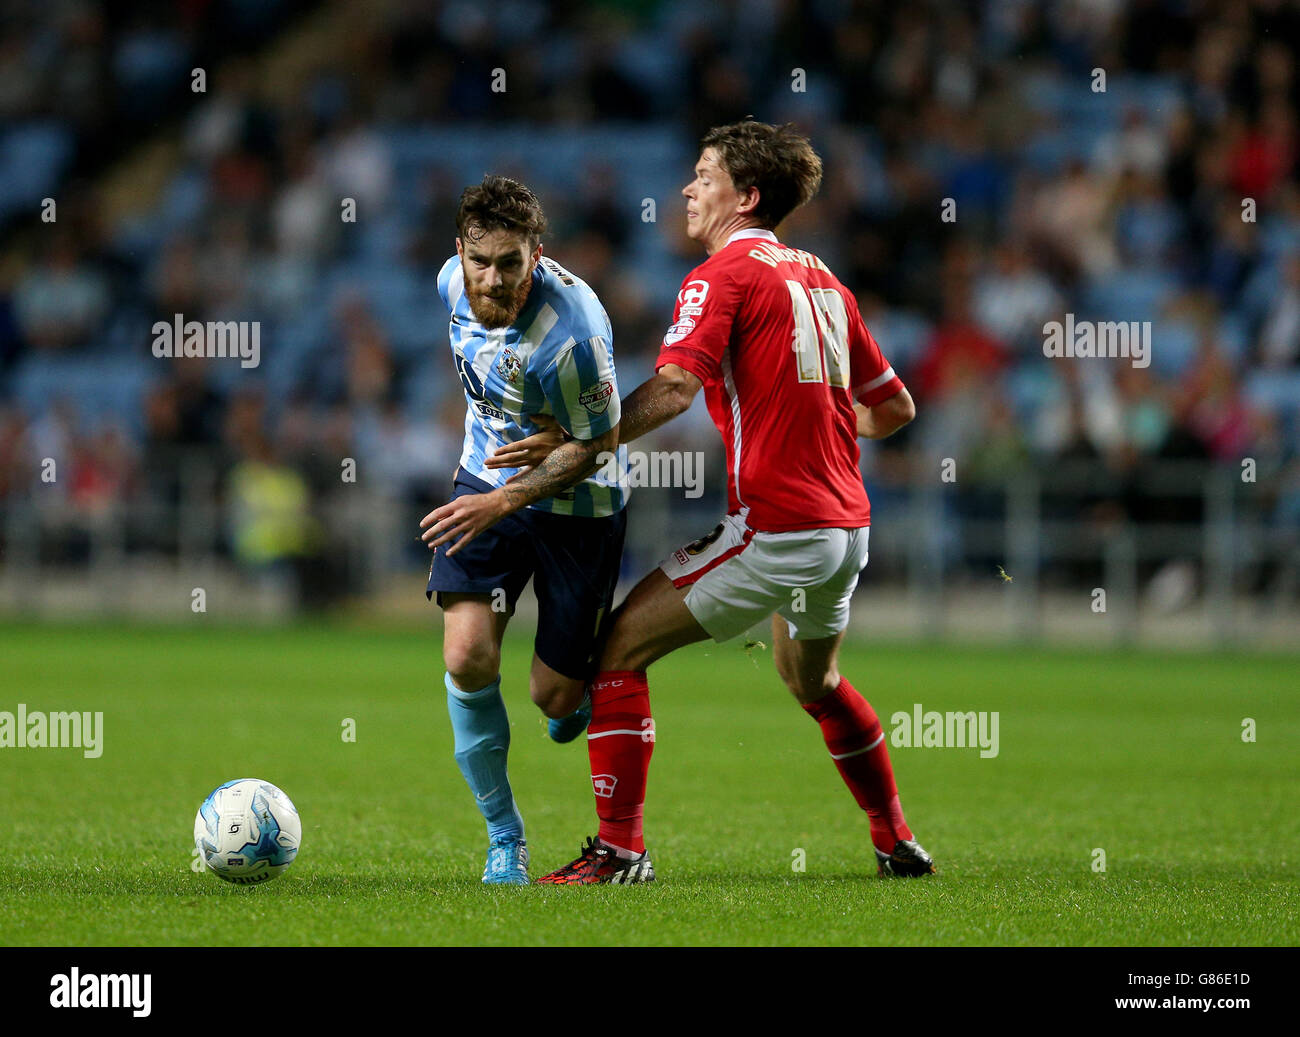 Coventry City's Romain Vincelot (left) and Crewe Alexandra's Billy Bingham battle for the ball during the Sky Bet League One match at the Ricoh Arena, Coventry. Stock Photo